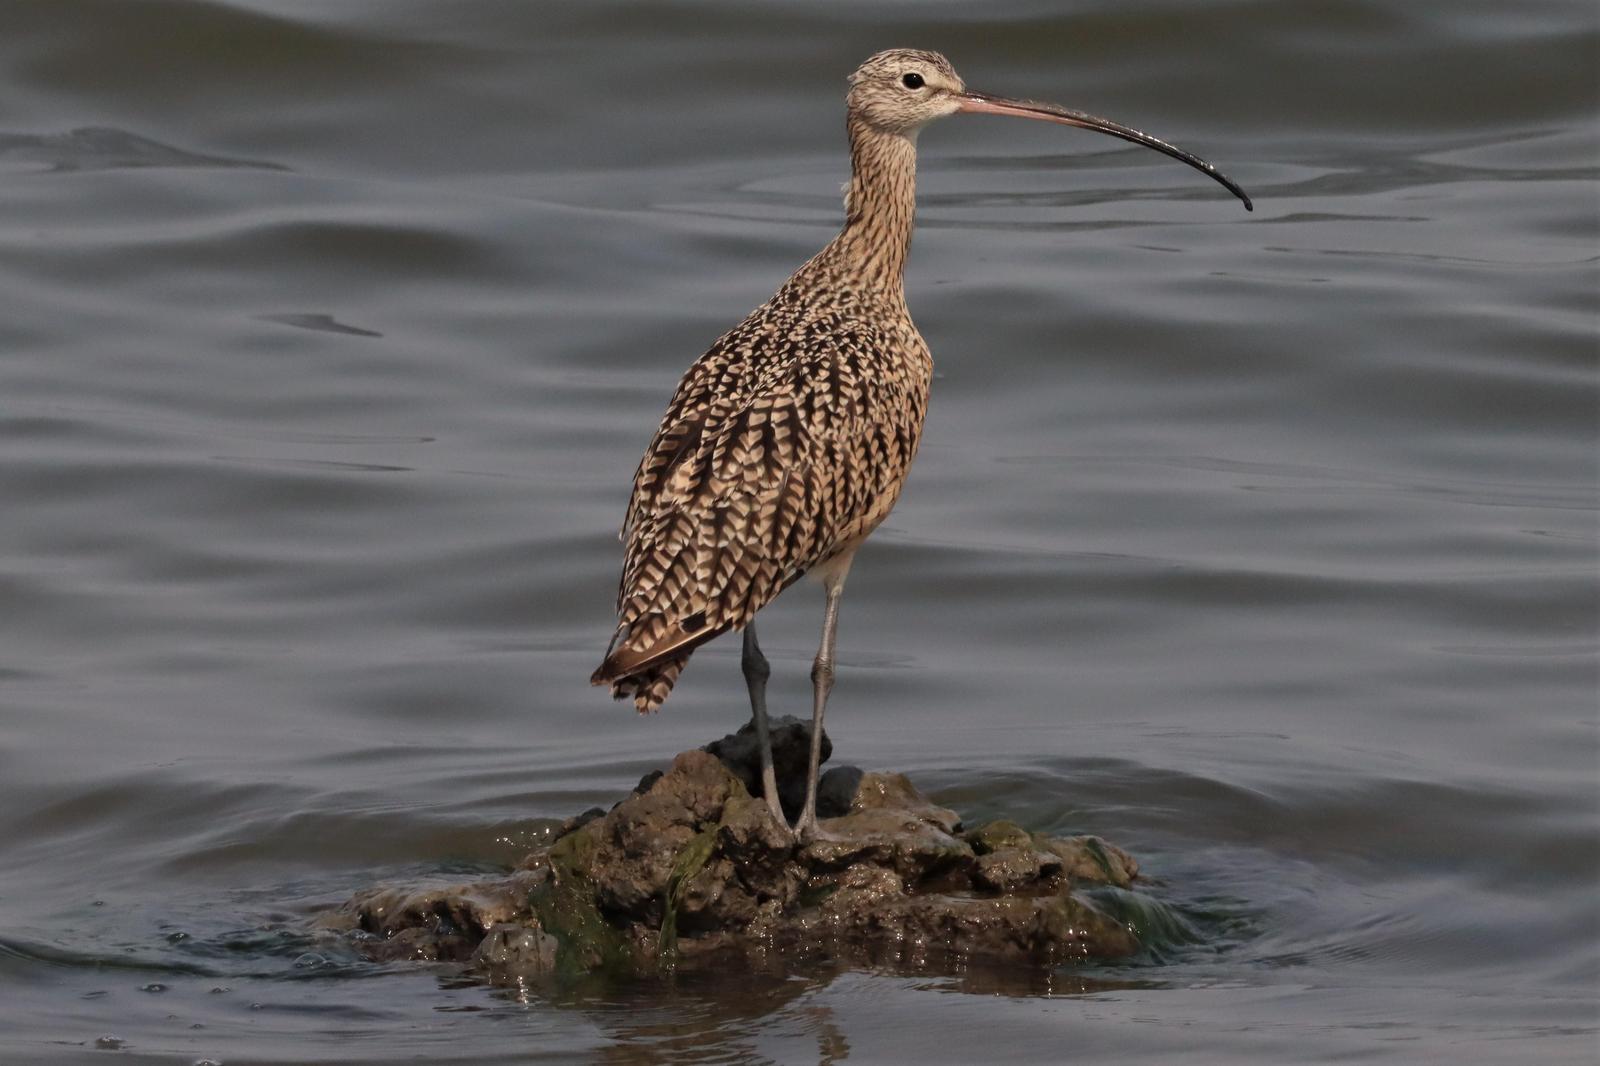 Long-billed Curlew Photo by Richard Jeffers